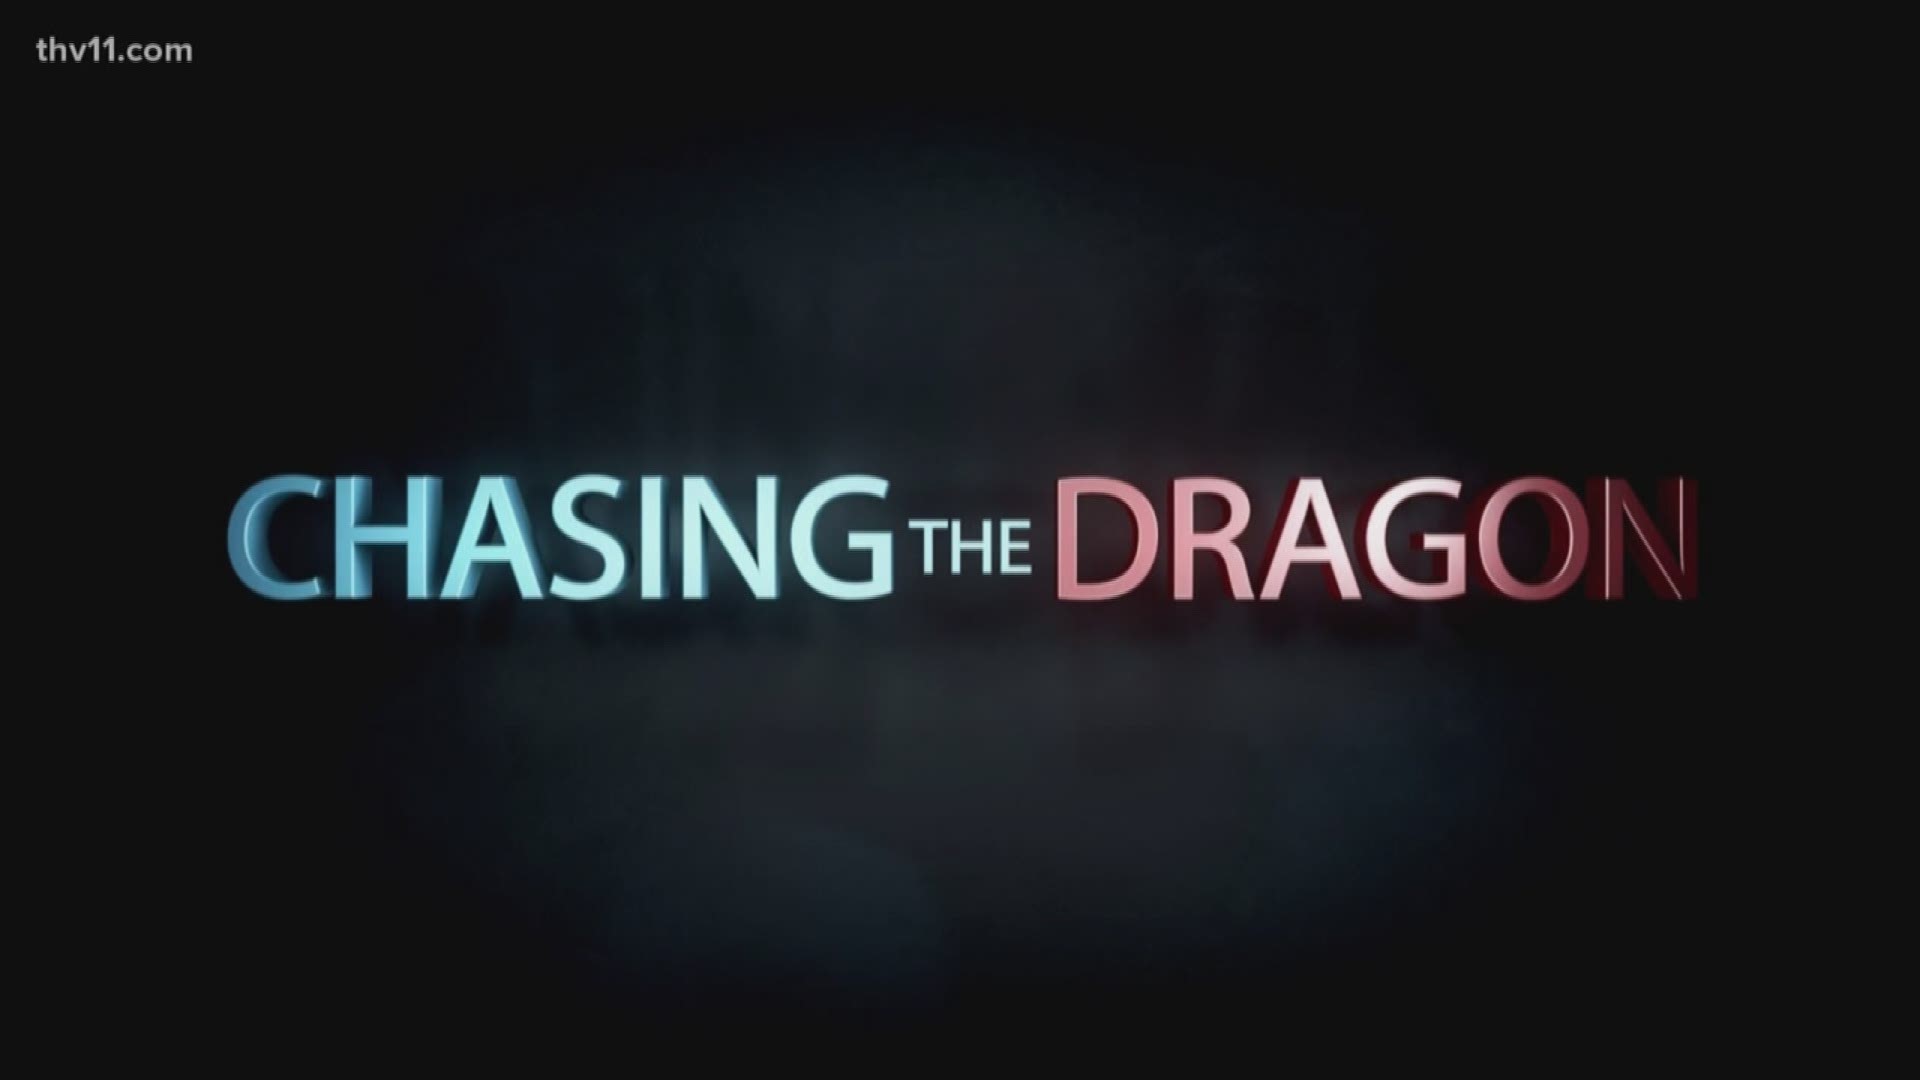 FBI of Little Rock is hosting a statewide viewing of "Chasing the Dragon," a documentary aimed at educating students and young adults about the dangers of addiction.